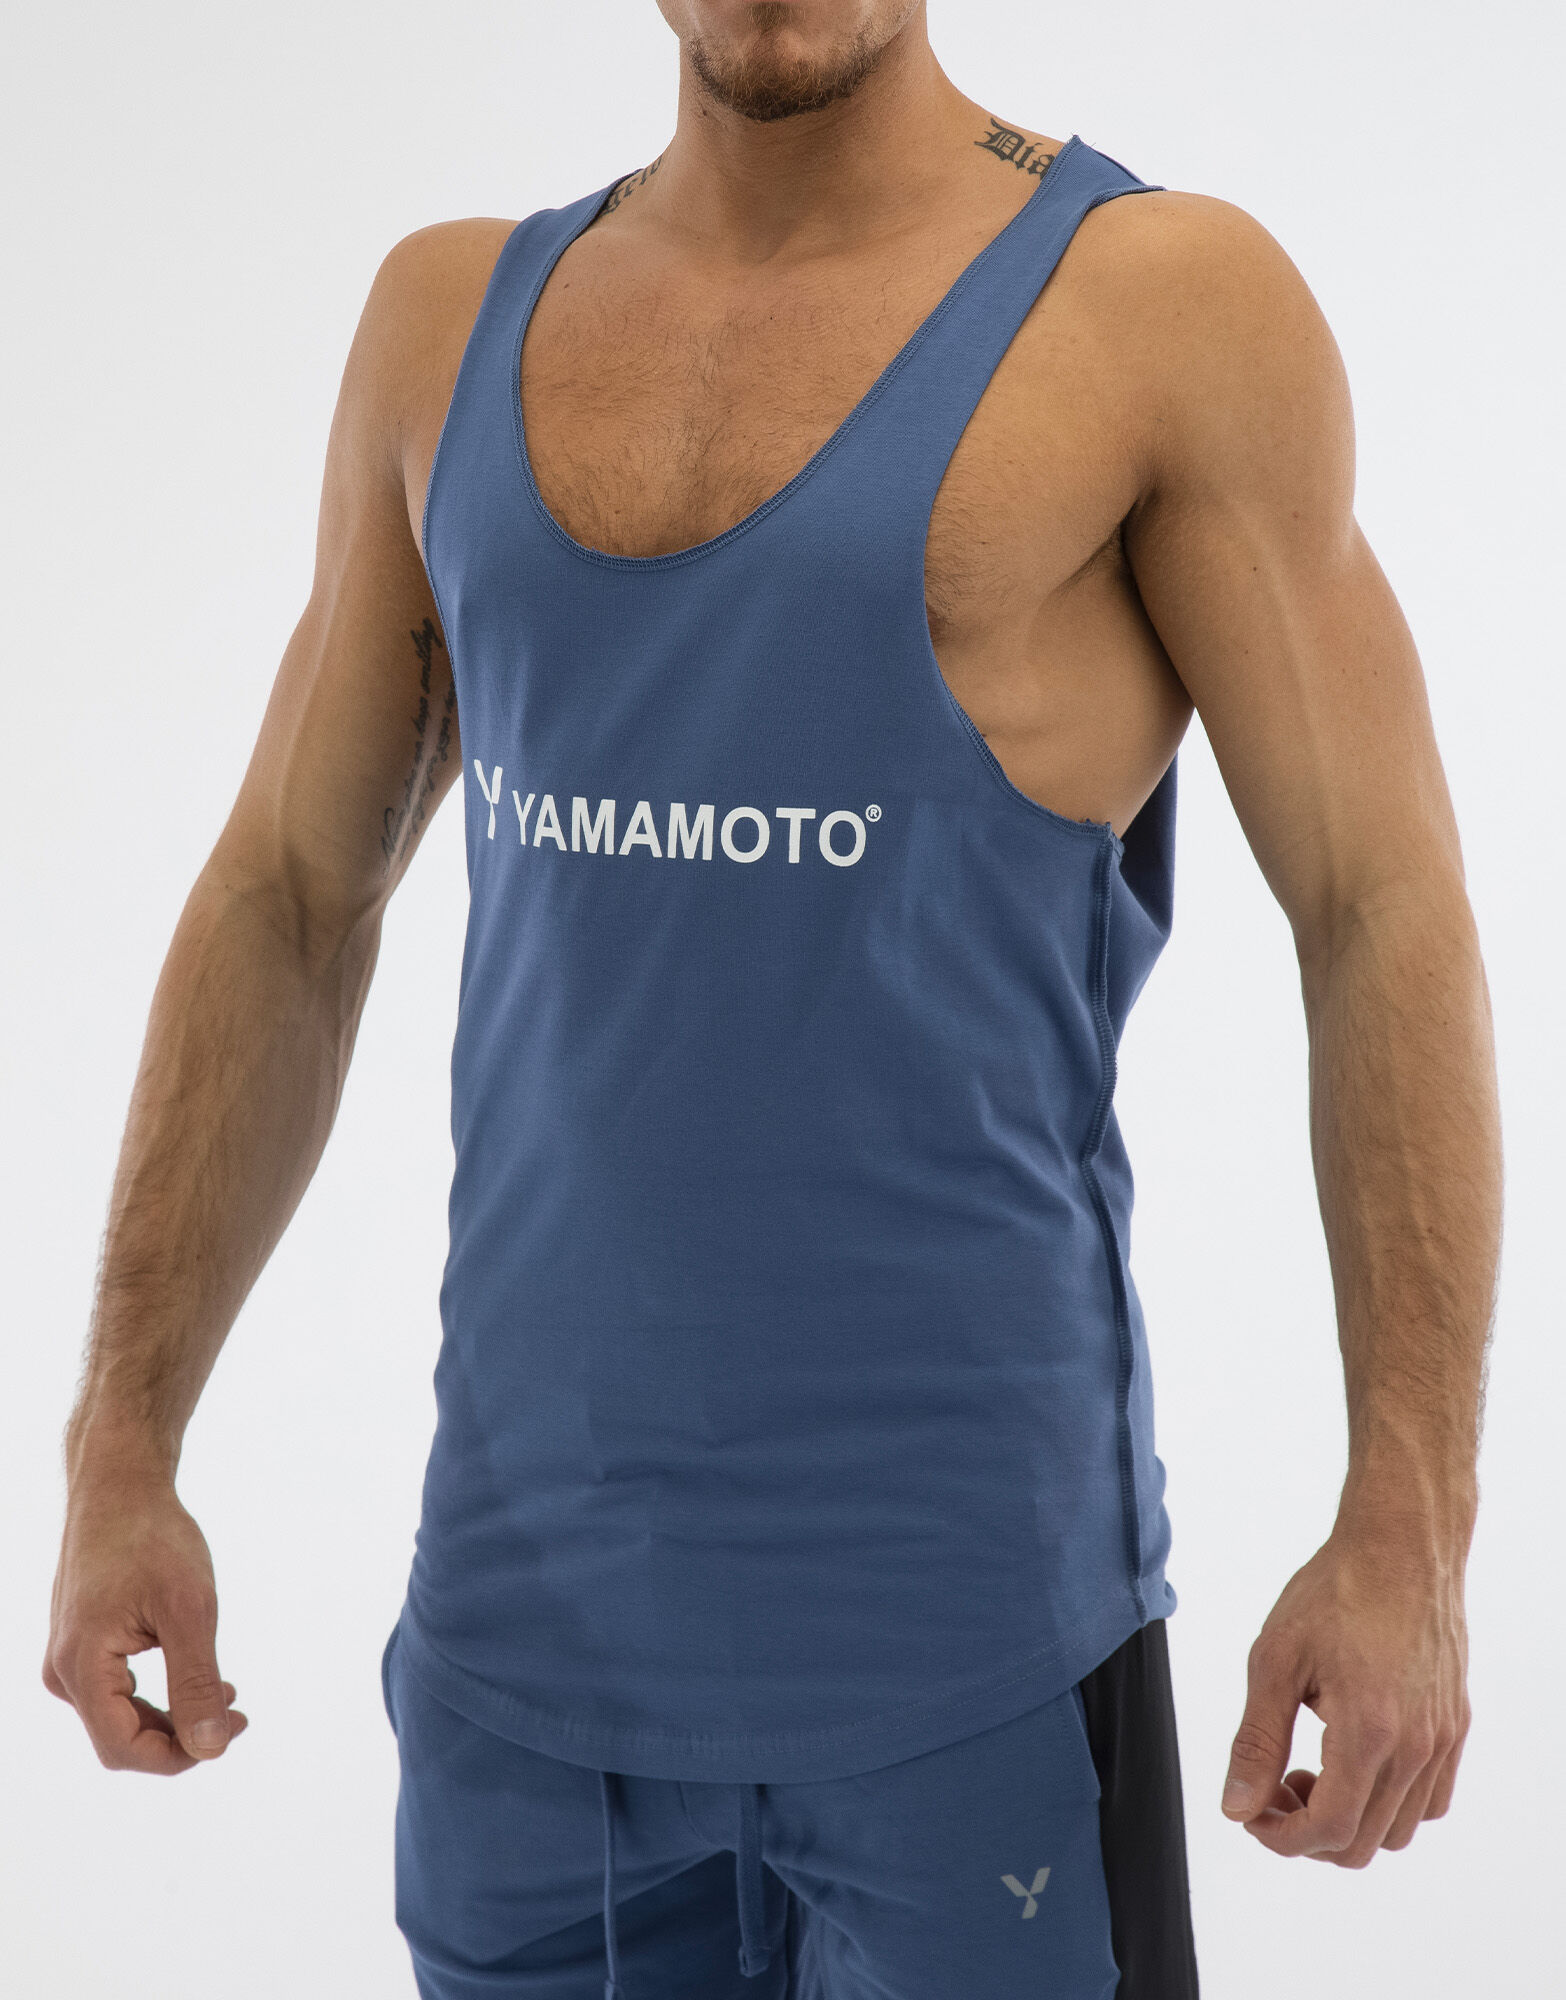 YAMAMOTO OUTFIT Man Tank Top Wide Shoulder Colore: Blu M